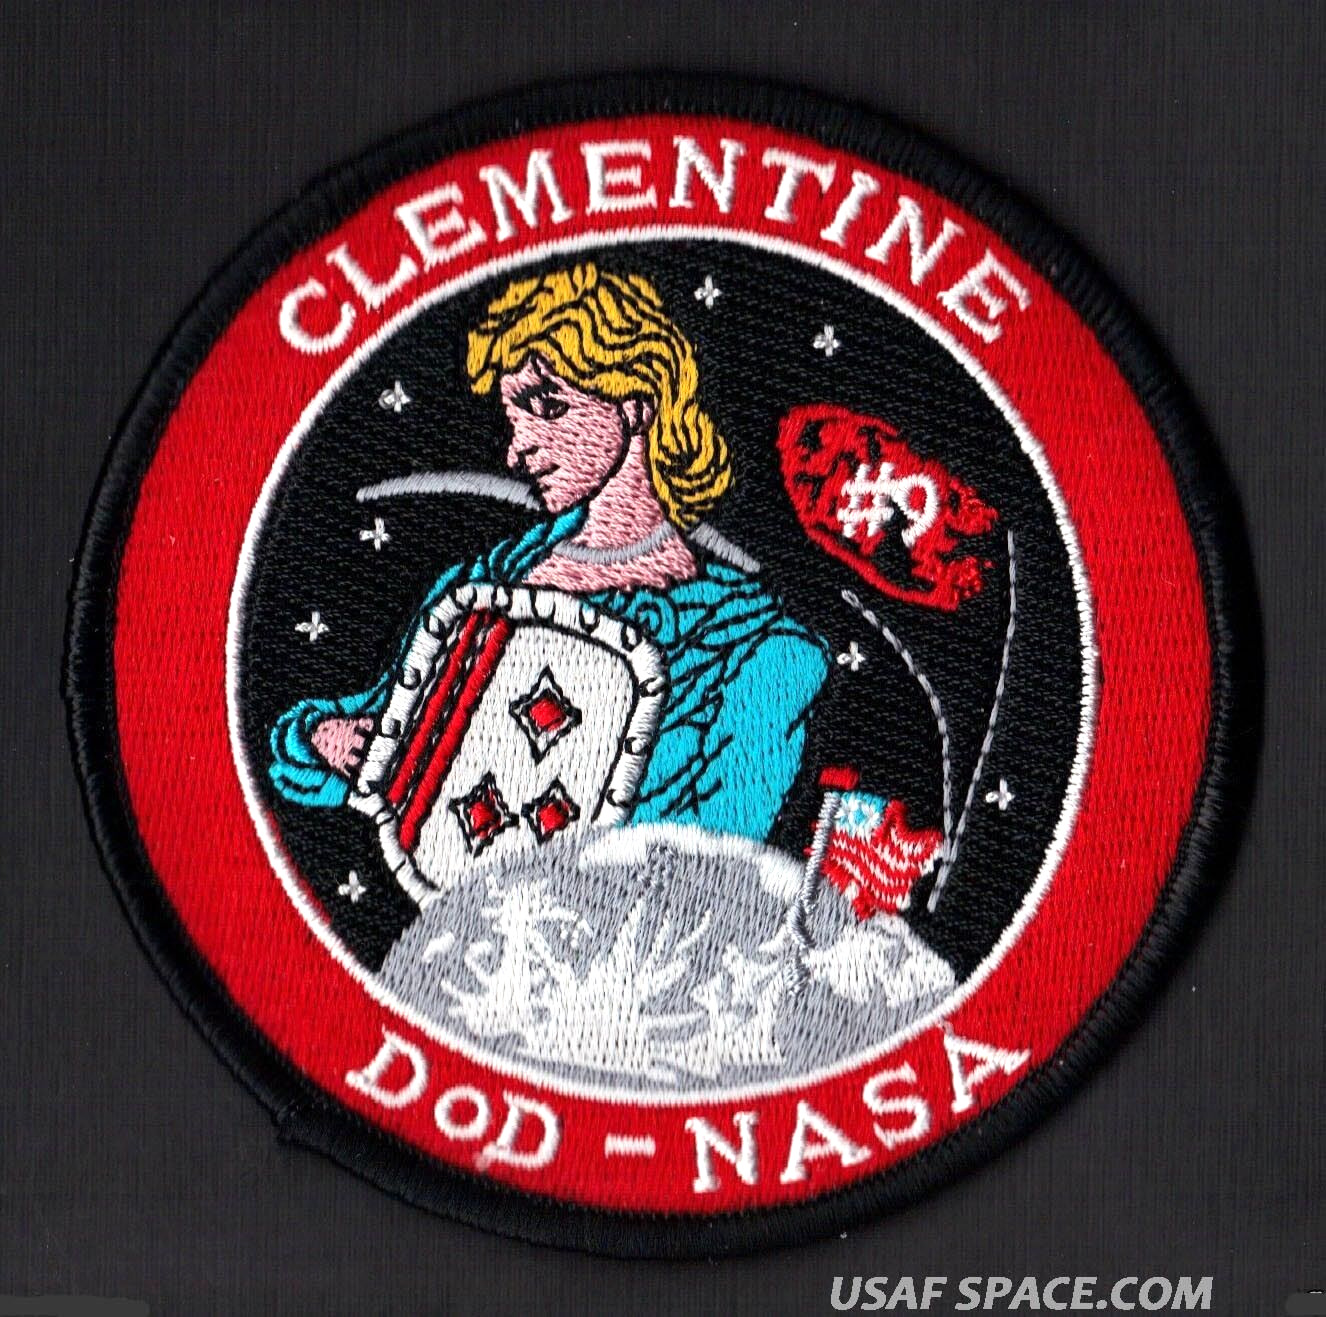 CLEMENTINE  DOD  NASA USAF CLASSIFIED SATELLITE SPACE MISSION LAUNCH PATCH